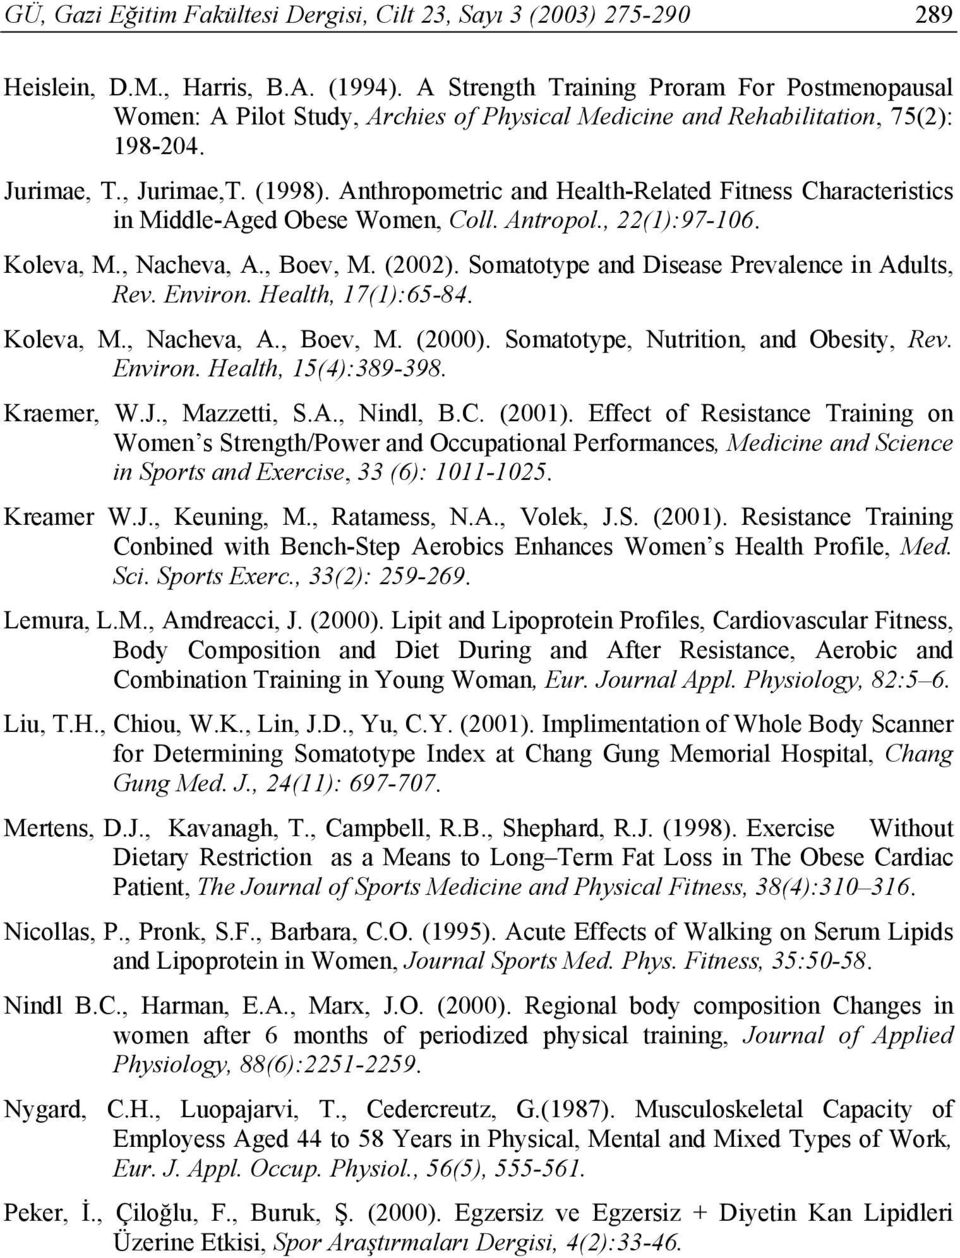 Anthropometric and Health-Related Fitness Characteristics in Middle-Aged Obese Women, Coll. Antropol., 22(1):97-106. Koleva, M., Nacheva, A., Boev, M. (2002).